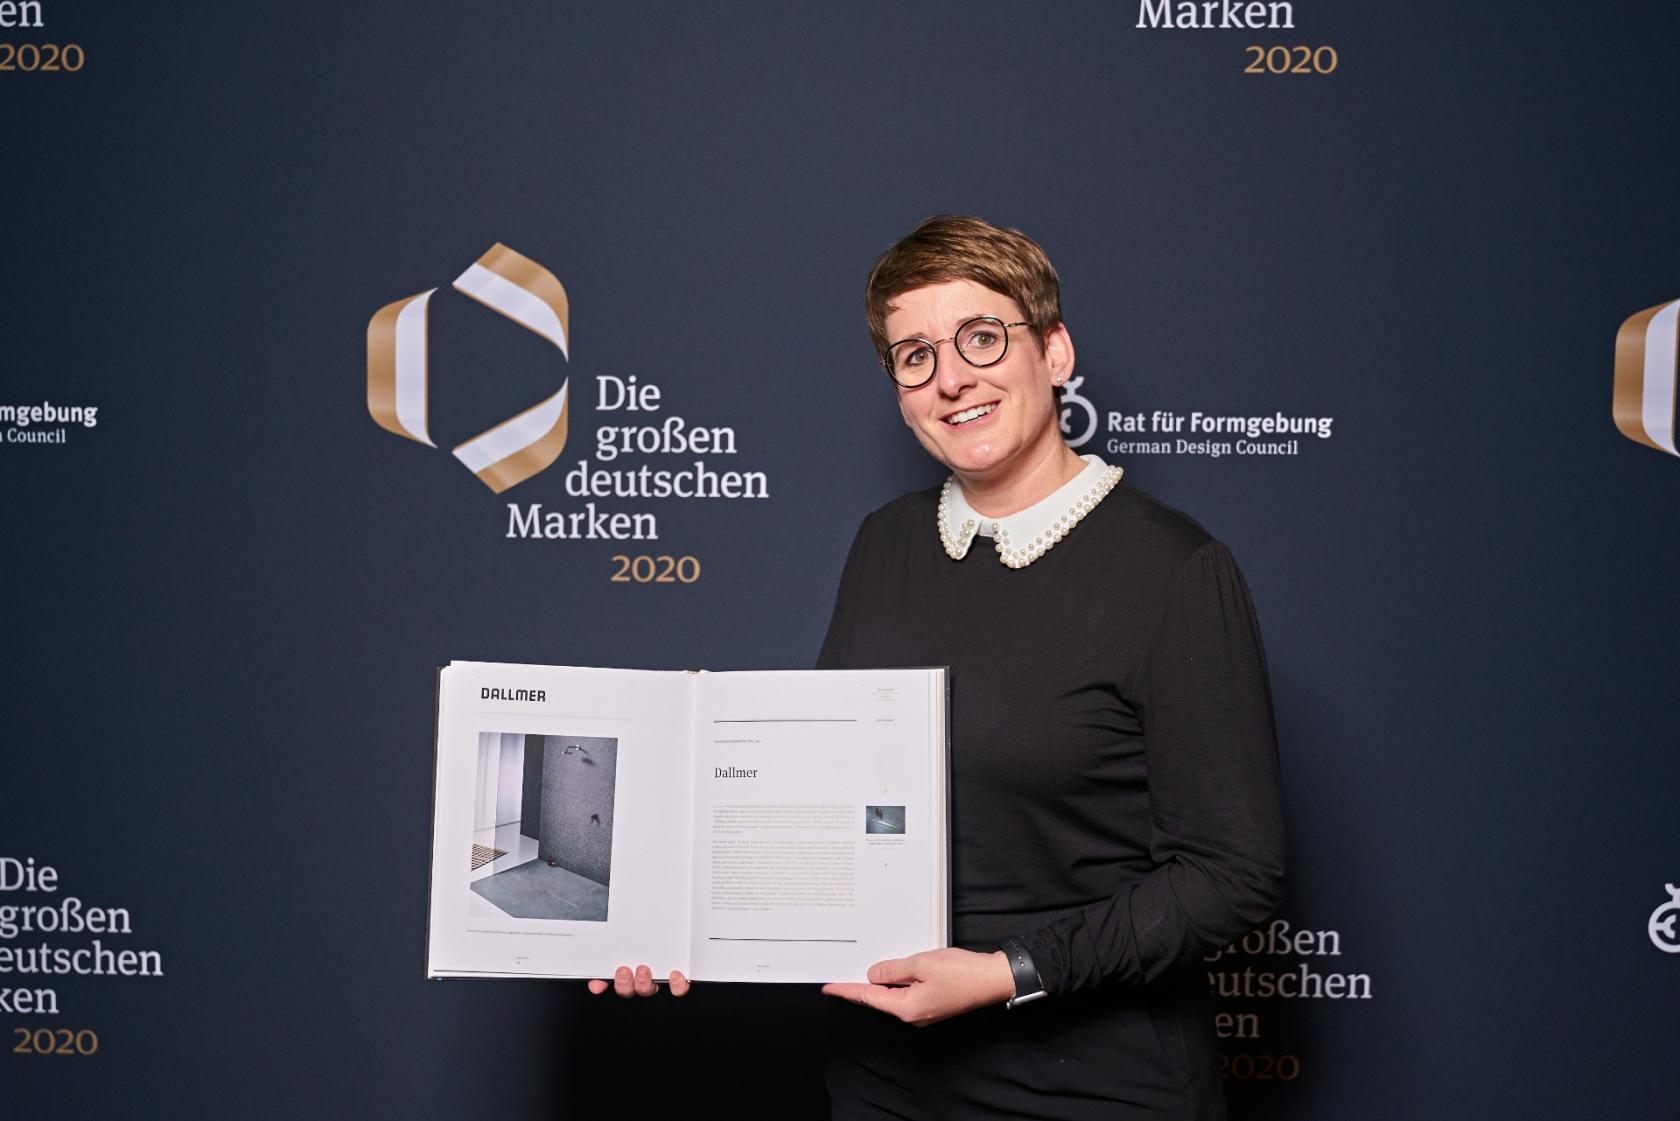 Recently, the seventh edition of the book ‘The Major German Brands’ was presented in Berlin. Yvonne Dallmer, Managing Director of Dallmer GmbH + Co. KG, proudly shows off her company’s mention in the publication of the German Design Council. (Photo:  German Design Council / photography:Martin Diepold, Grand Visions)
